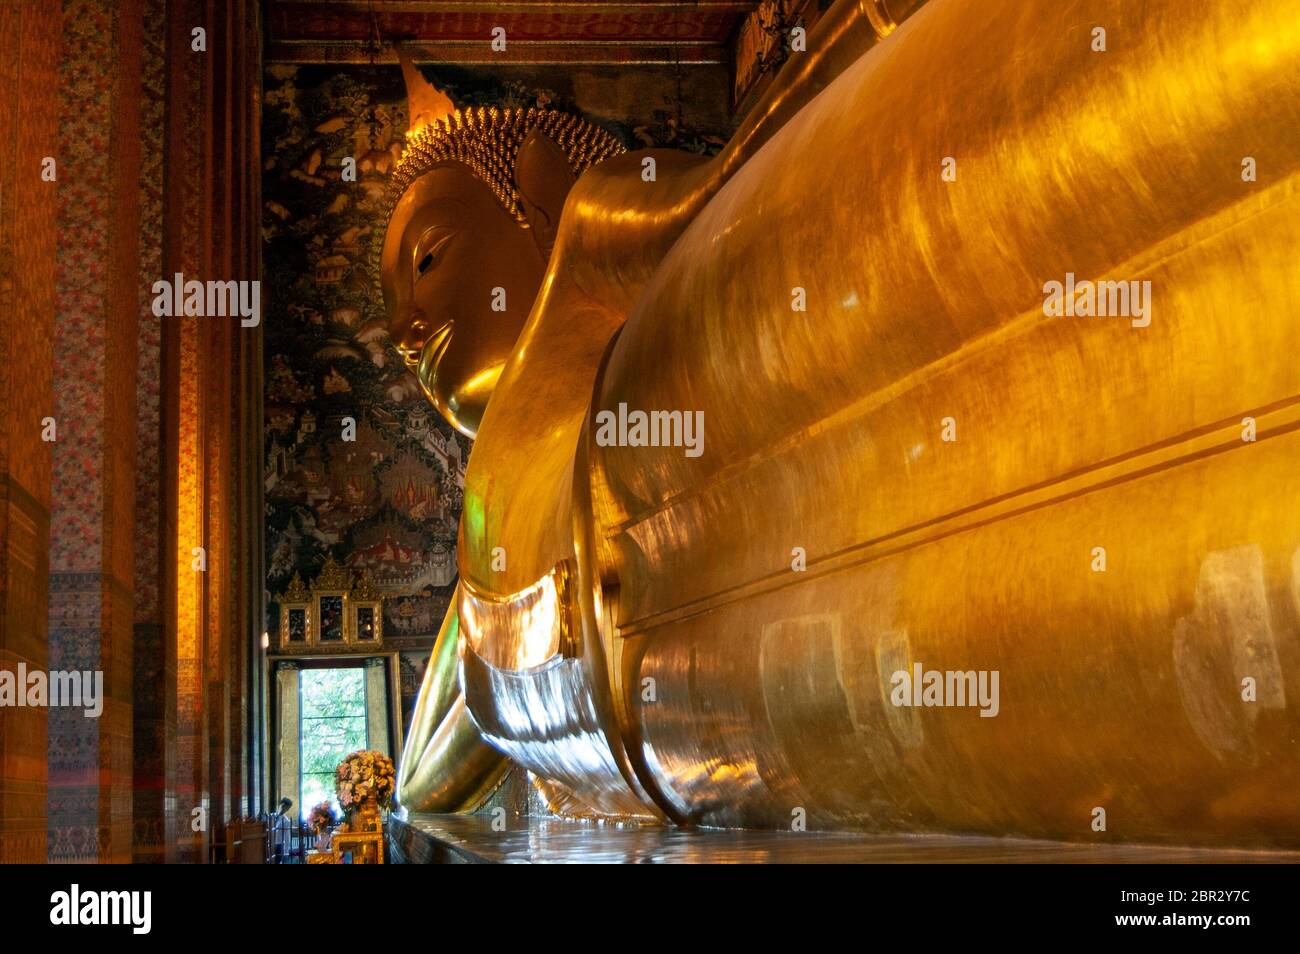 The Temple of the Reclining Buddha, in Bangkok. Stock Photo